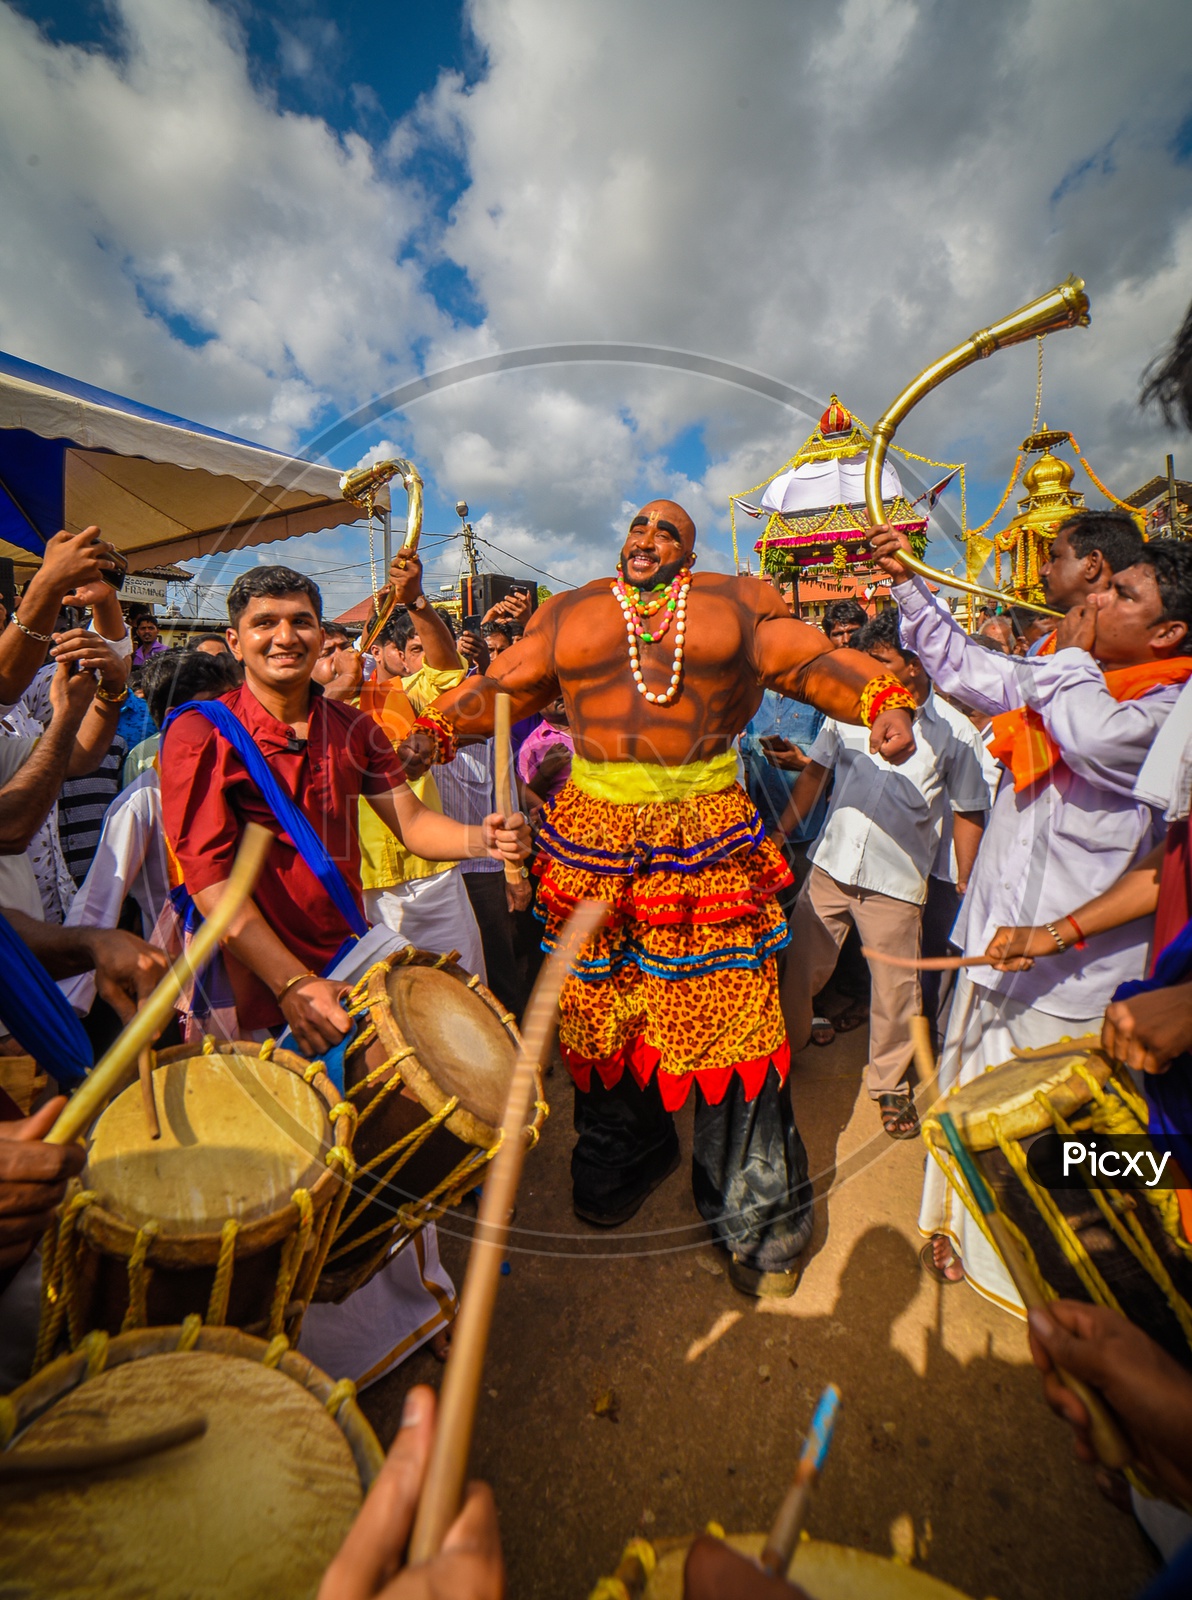 Celebrations with drums and traditional costumes